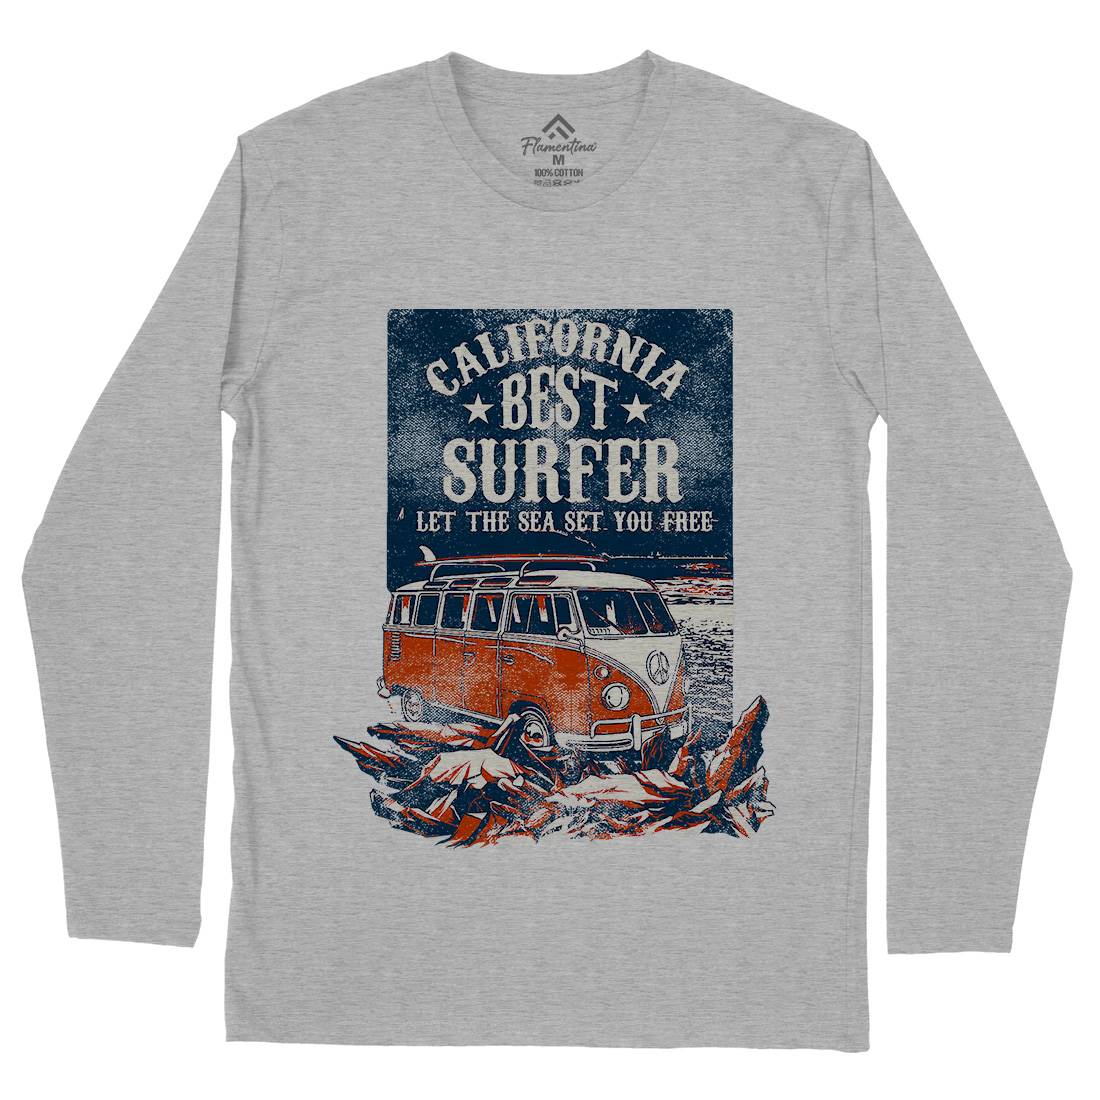 Let The Sea Set You Free Mens Long Sleeve T-Shirt Surf C956